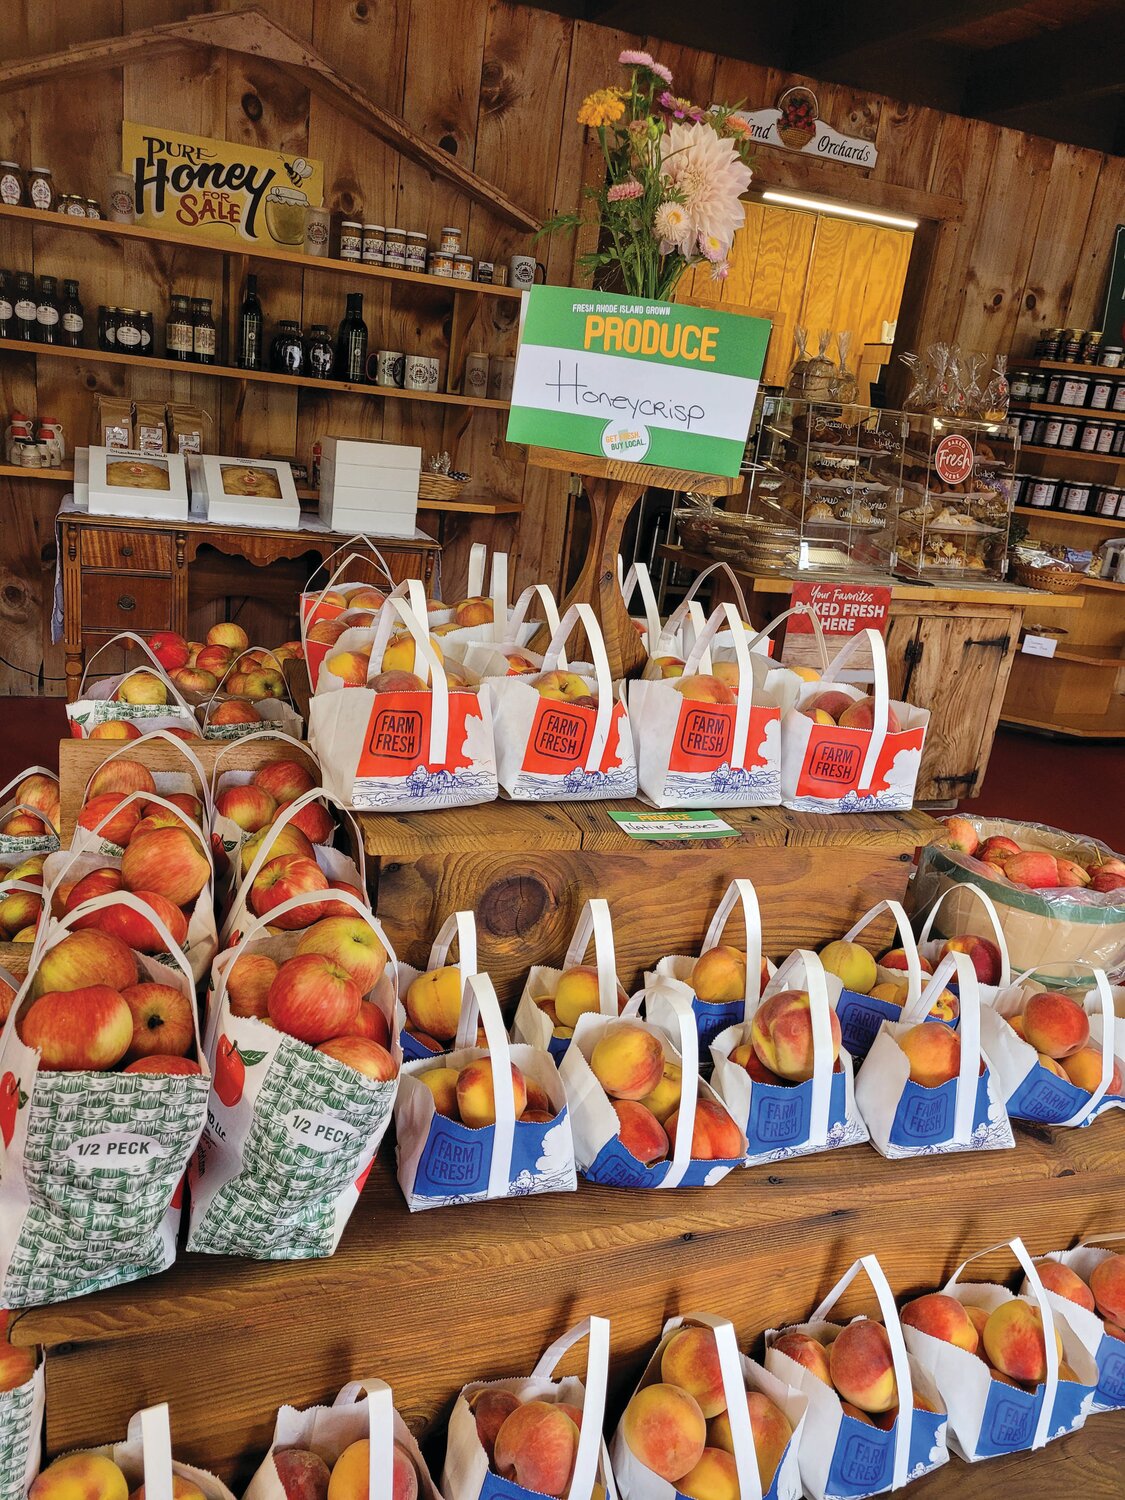 APPLELAND: The new owners at Appleland urge prospective pickers to stop by their orchard store and farm stand at 135 Smith Ave., Greenville. They’re open 8 a.m. to 6 p.m. daily.